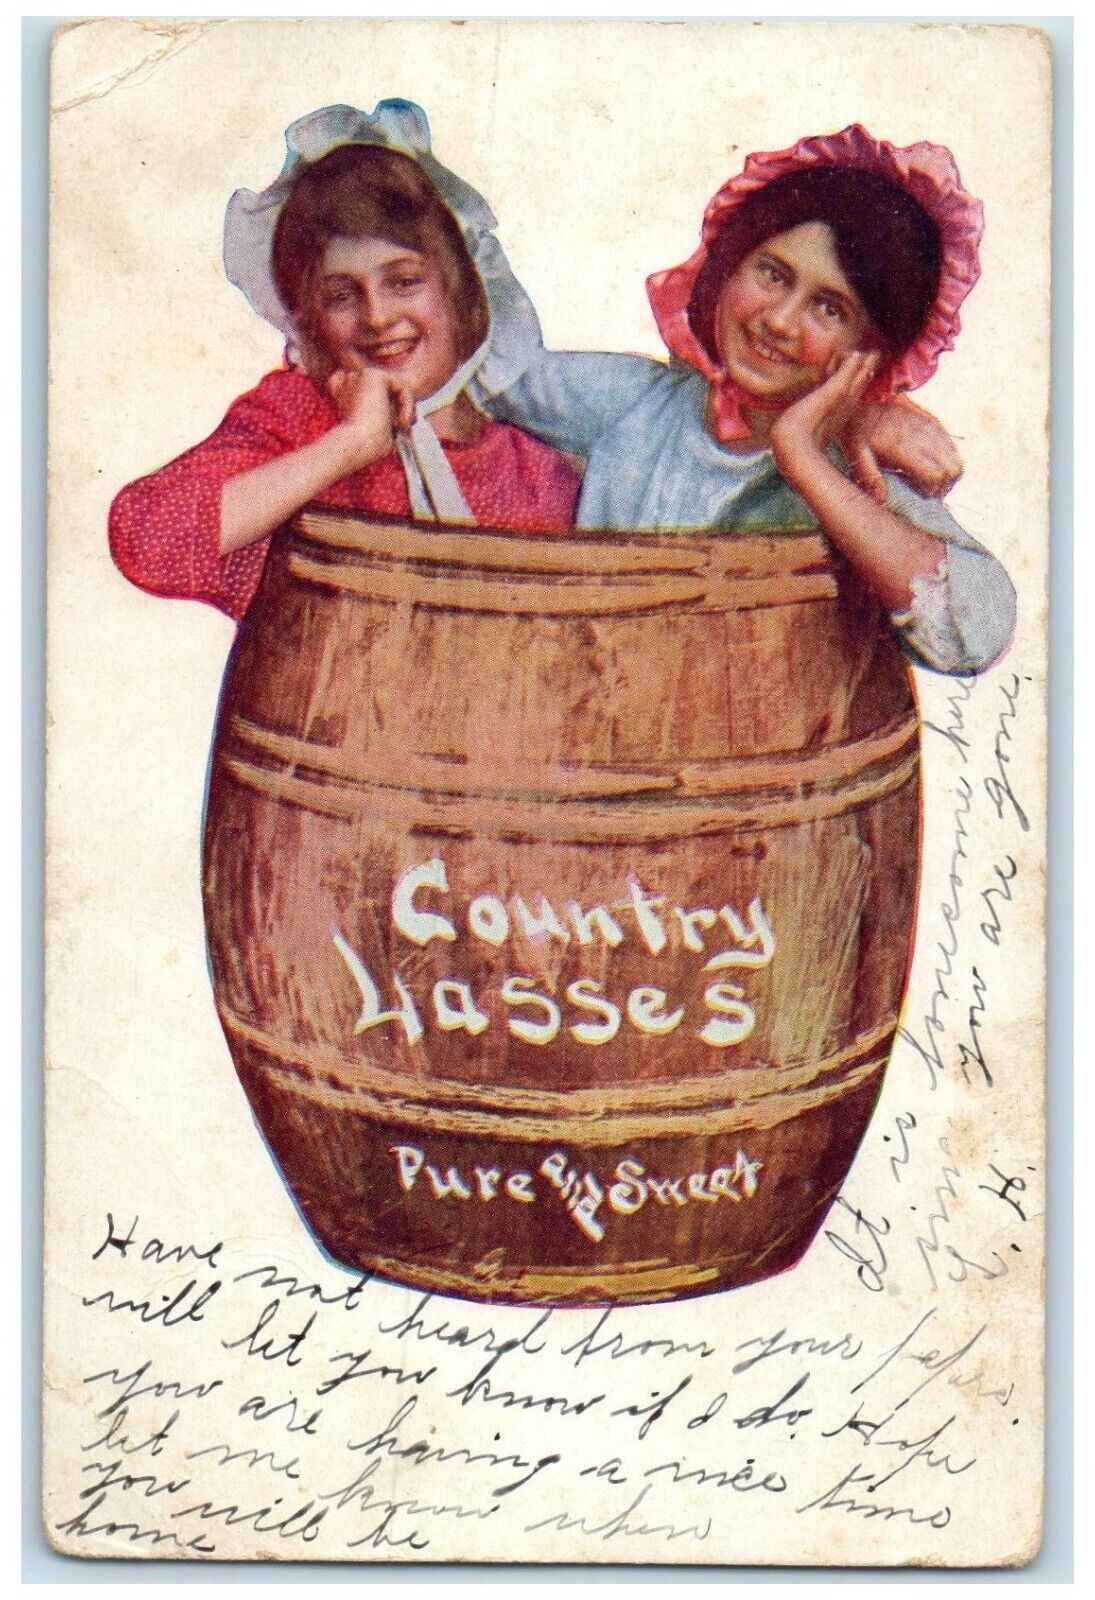 1907 Girls In Barrel County Hasses Pure & Sweet Amboy Illinois IL Postcard